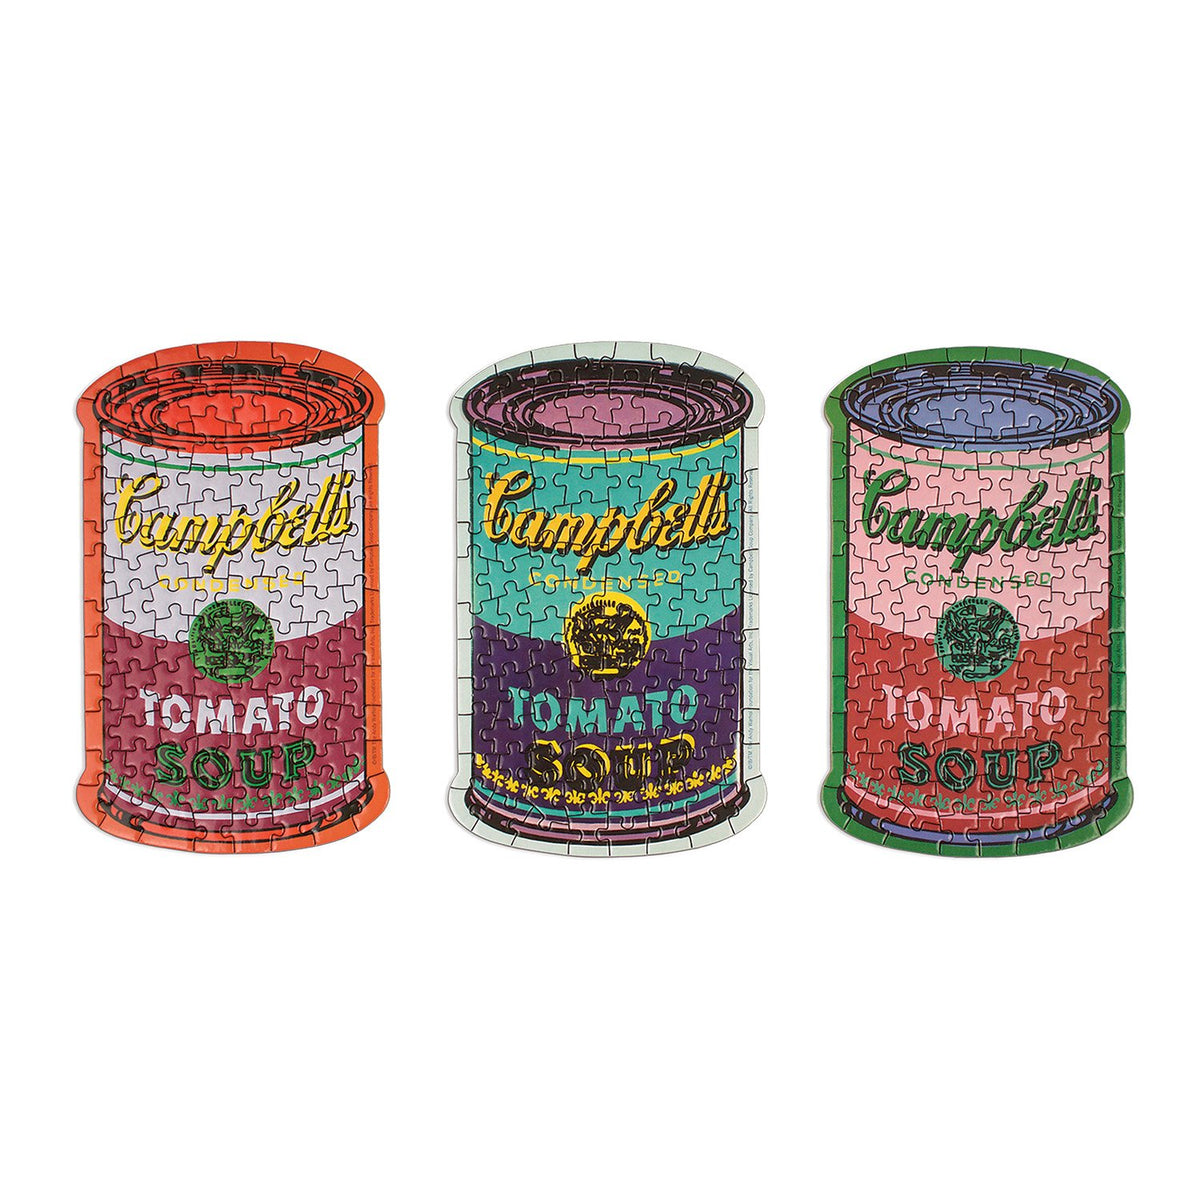 Andy Warhol Soup Cans Set of 3 Shaped Puzzles in Tins